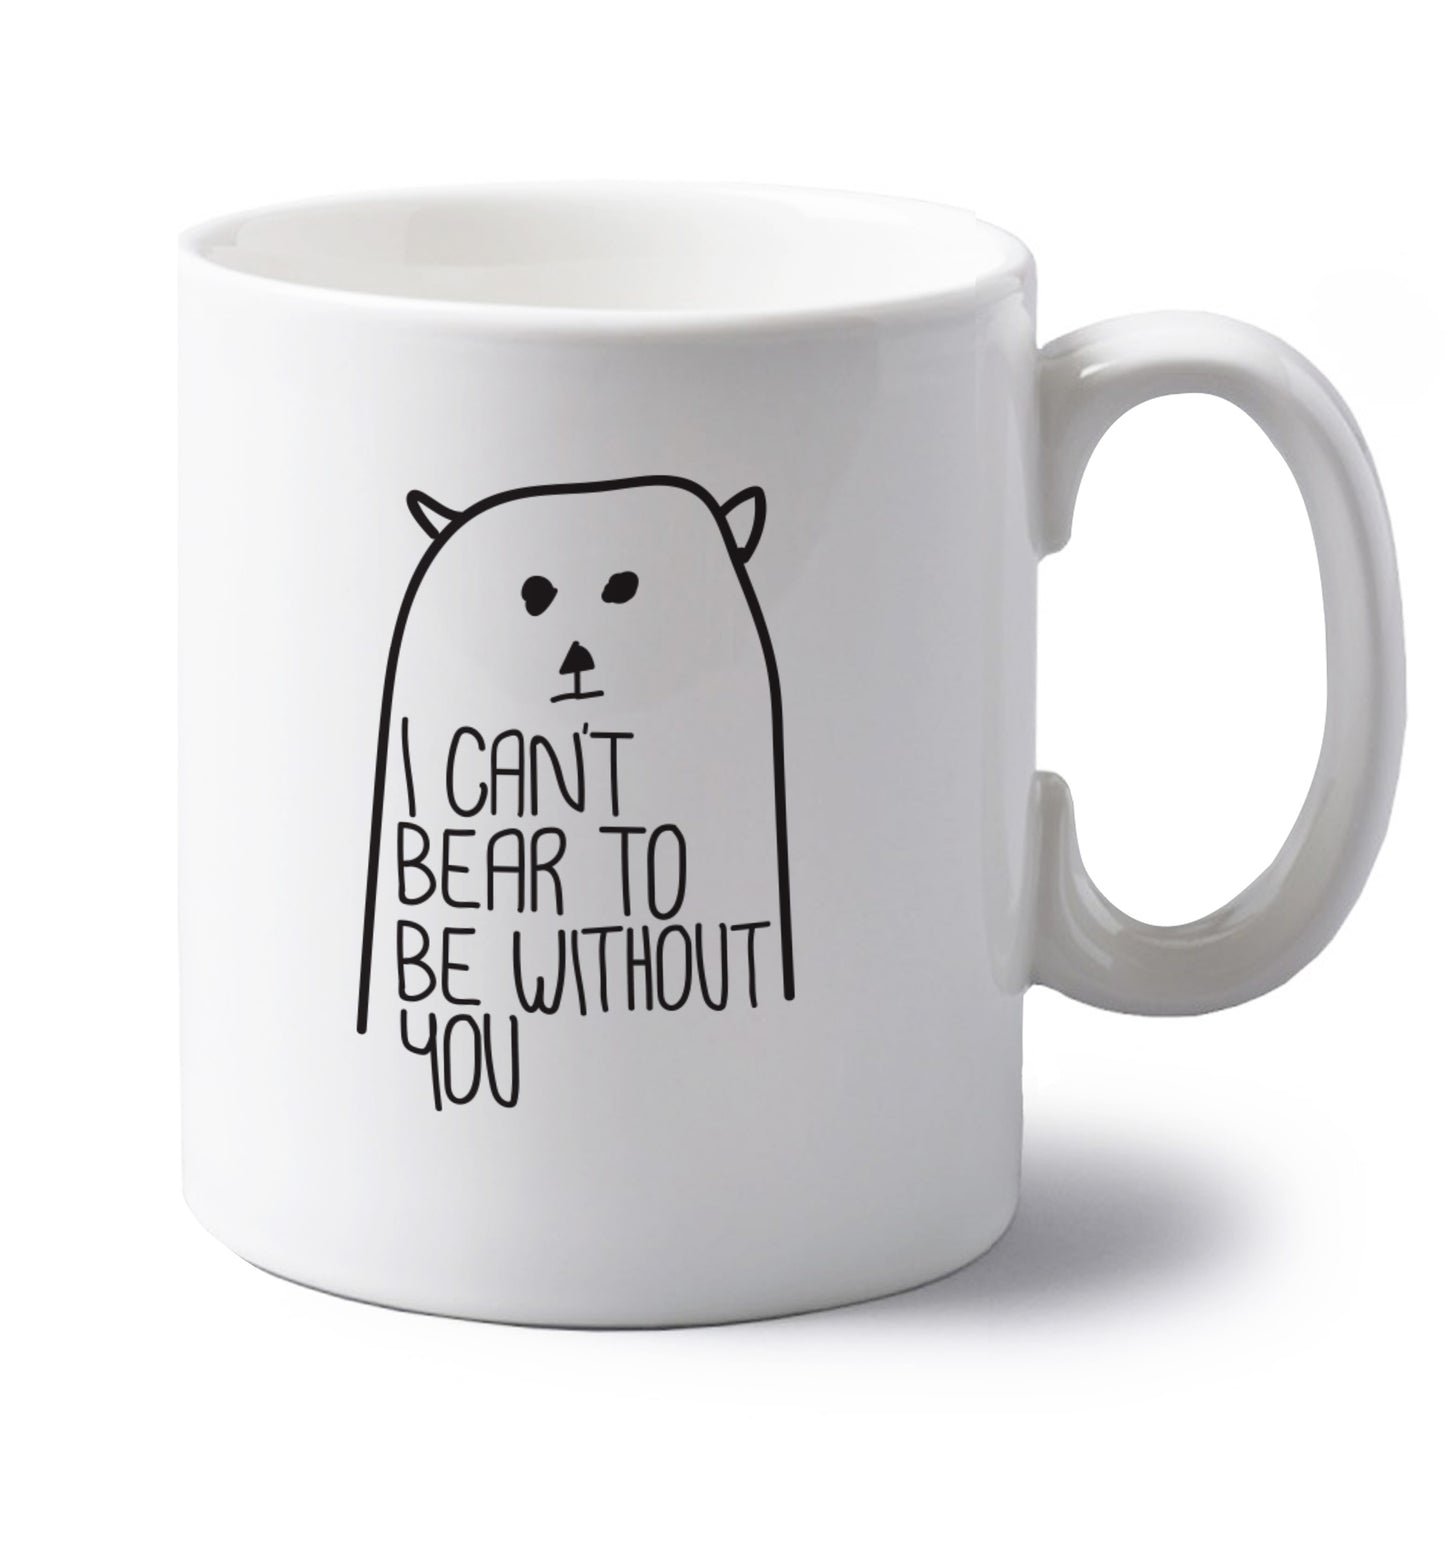 I can't bear to be without you left handed white ceramic mug 